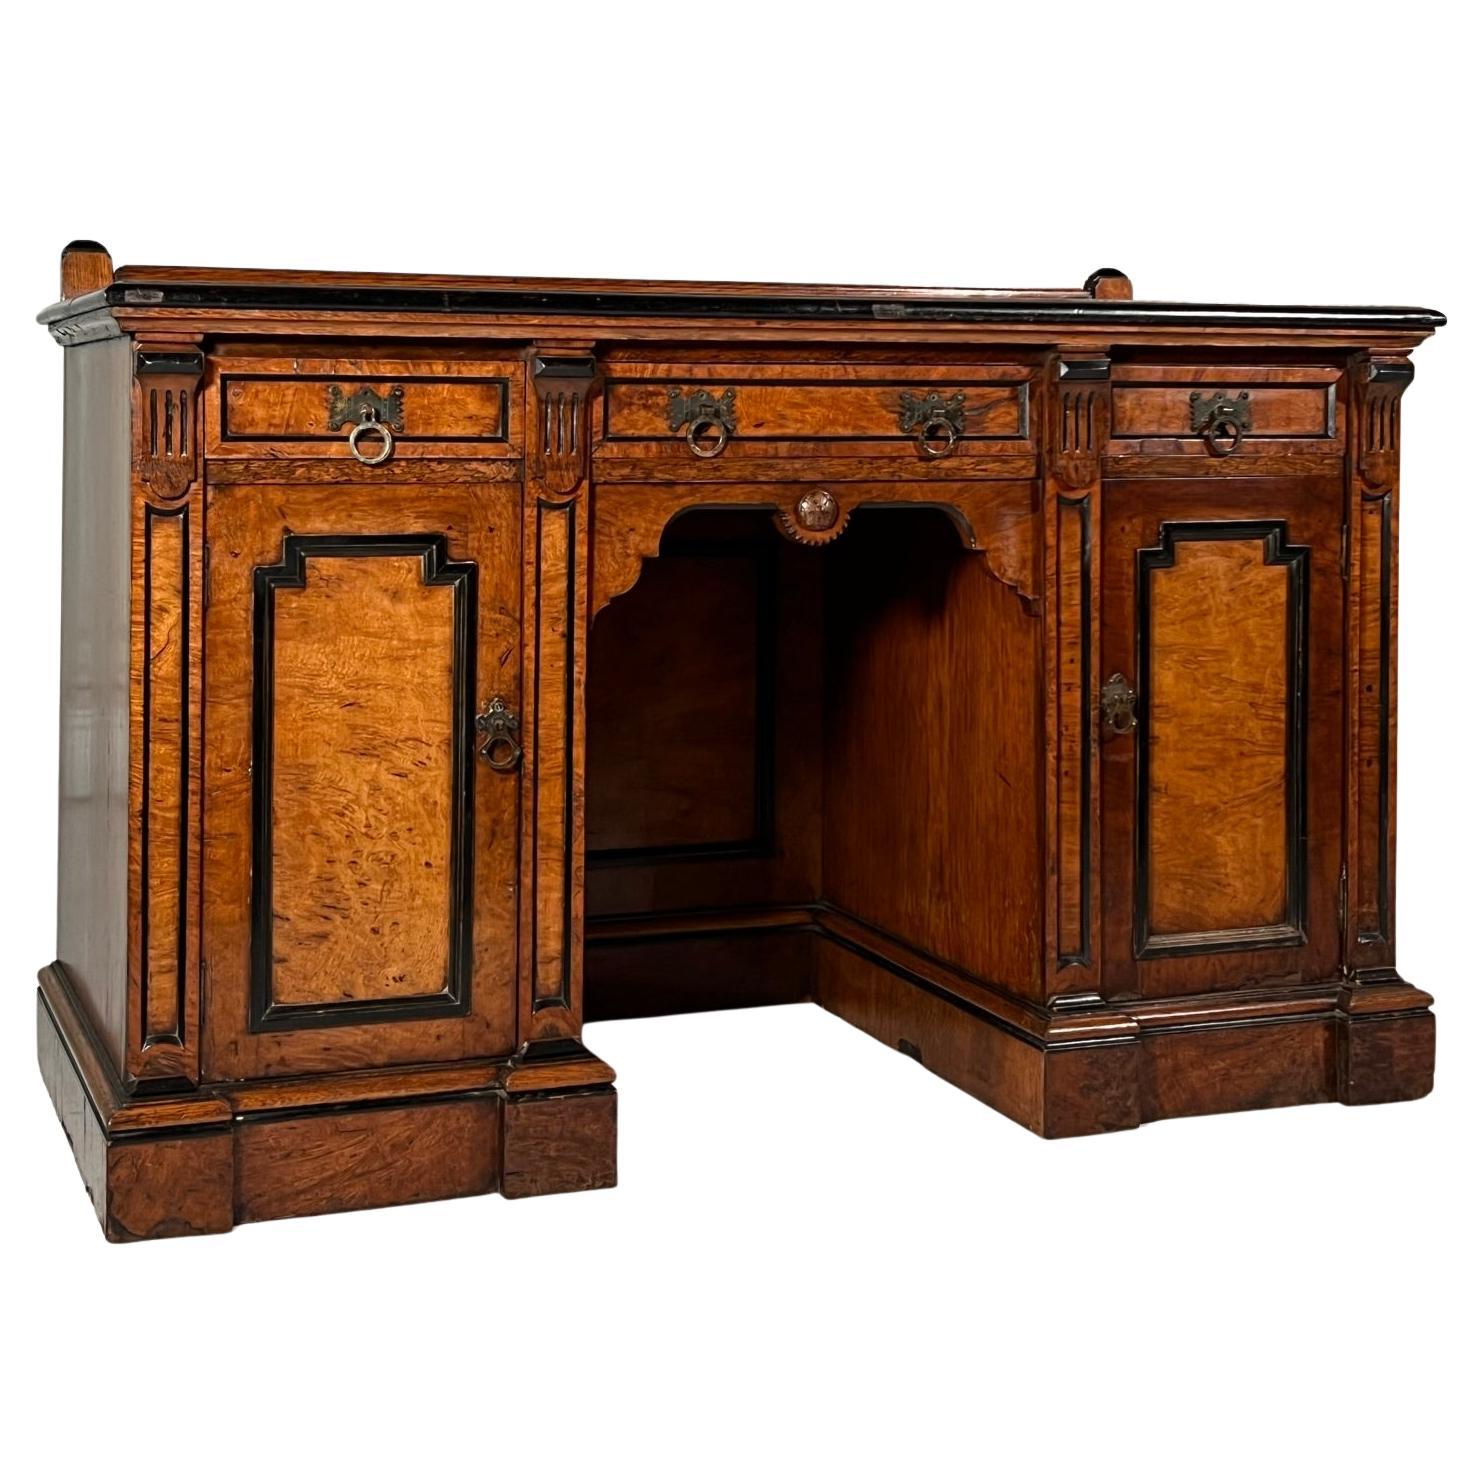 19th Century Aesthetic Movement Kneehole Desk For Sale